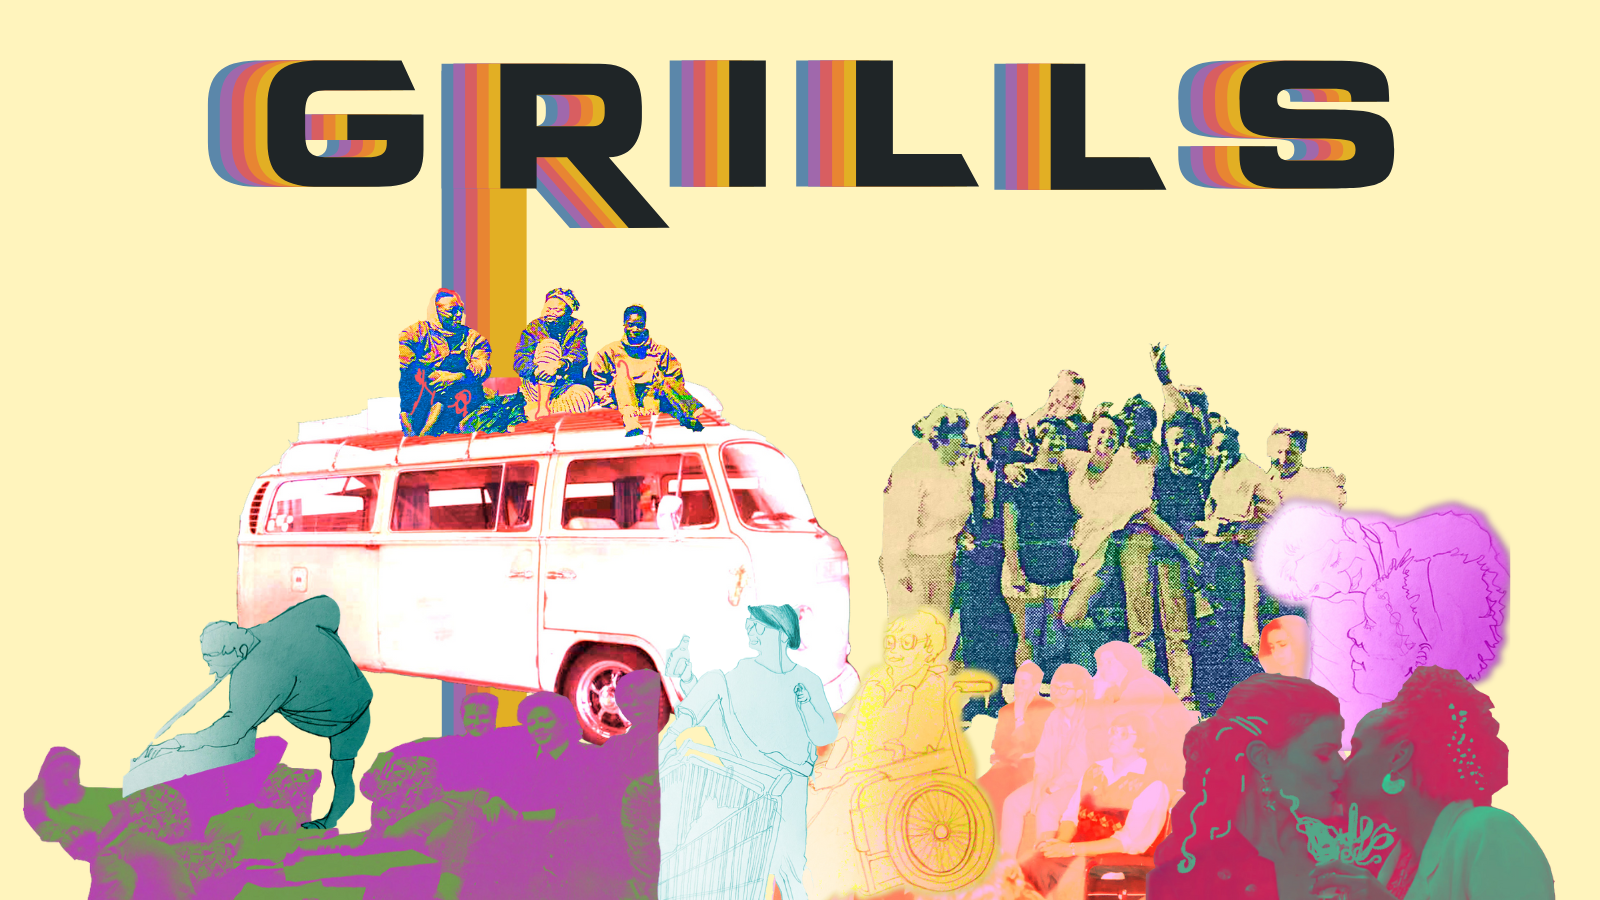 GRILLS written in black capital letters with rainbow shadows on a pale yellow background. Beneath this is a collage of images from the archives of queer women and hand-drawn images of women embracing and loving life. Artwork by Jhinuk Sarkar.